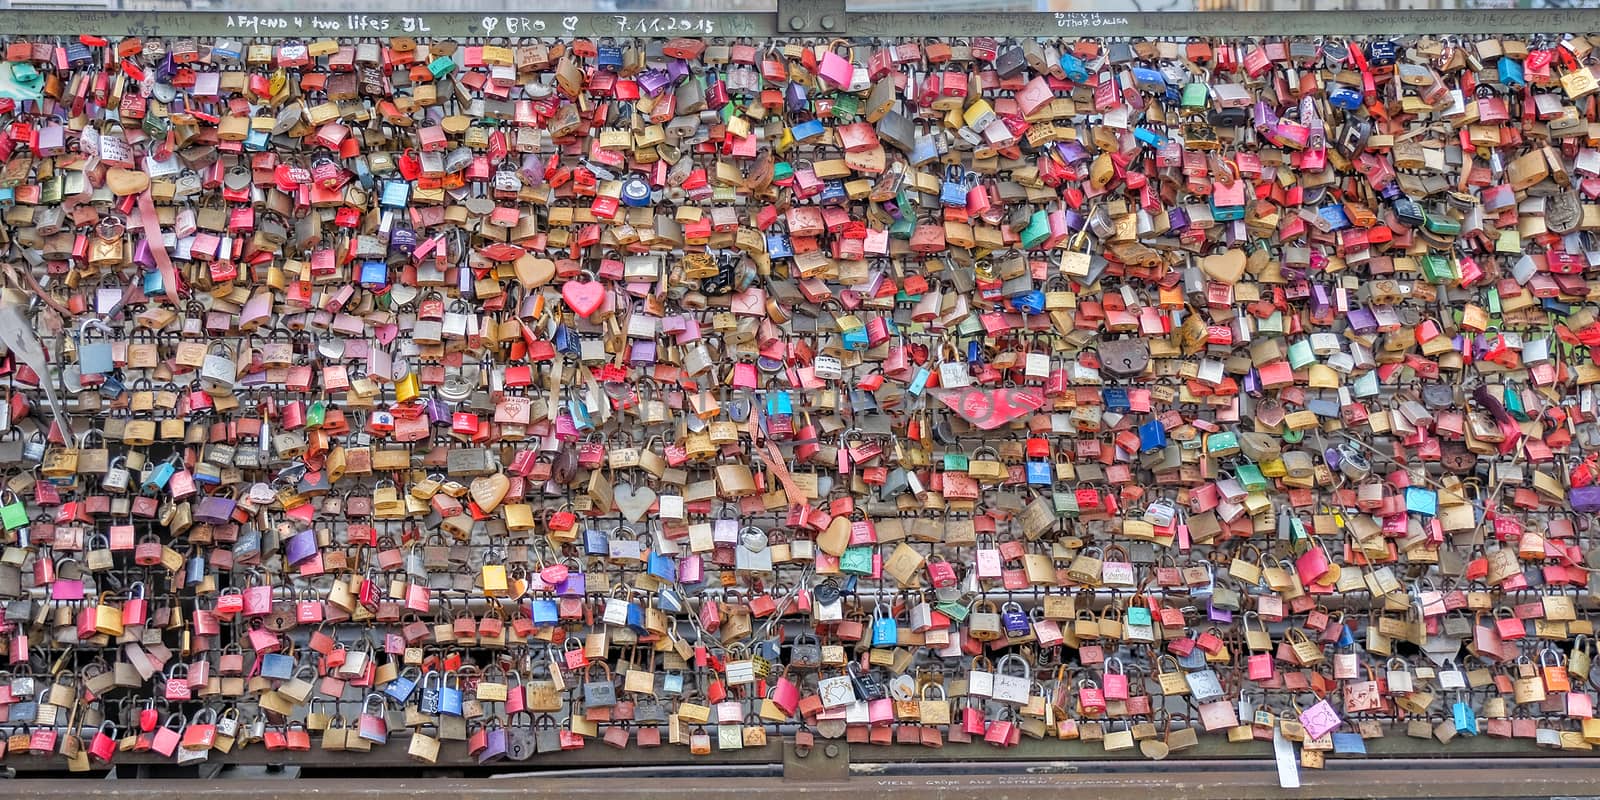 COLOGNE, GERMANY - MARCH 26: One of the main tourist attractions is the colorful love padlocks across the Hohenzollern Bridge on March 26, 2017 in Cologne.Germany